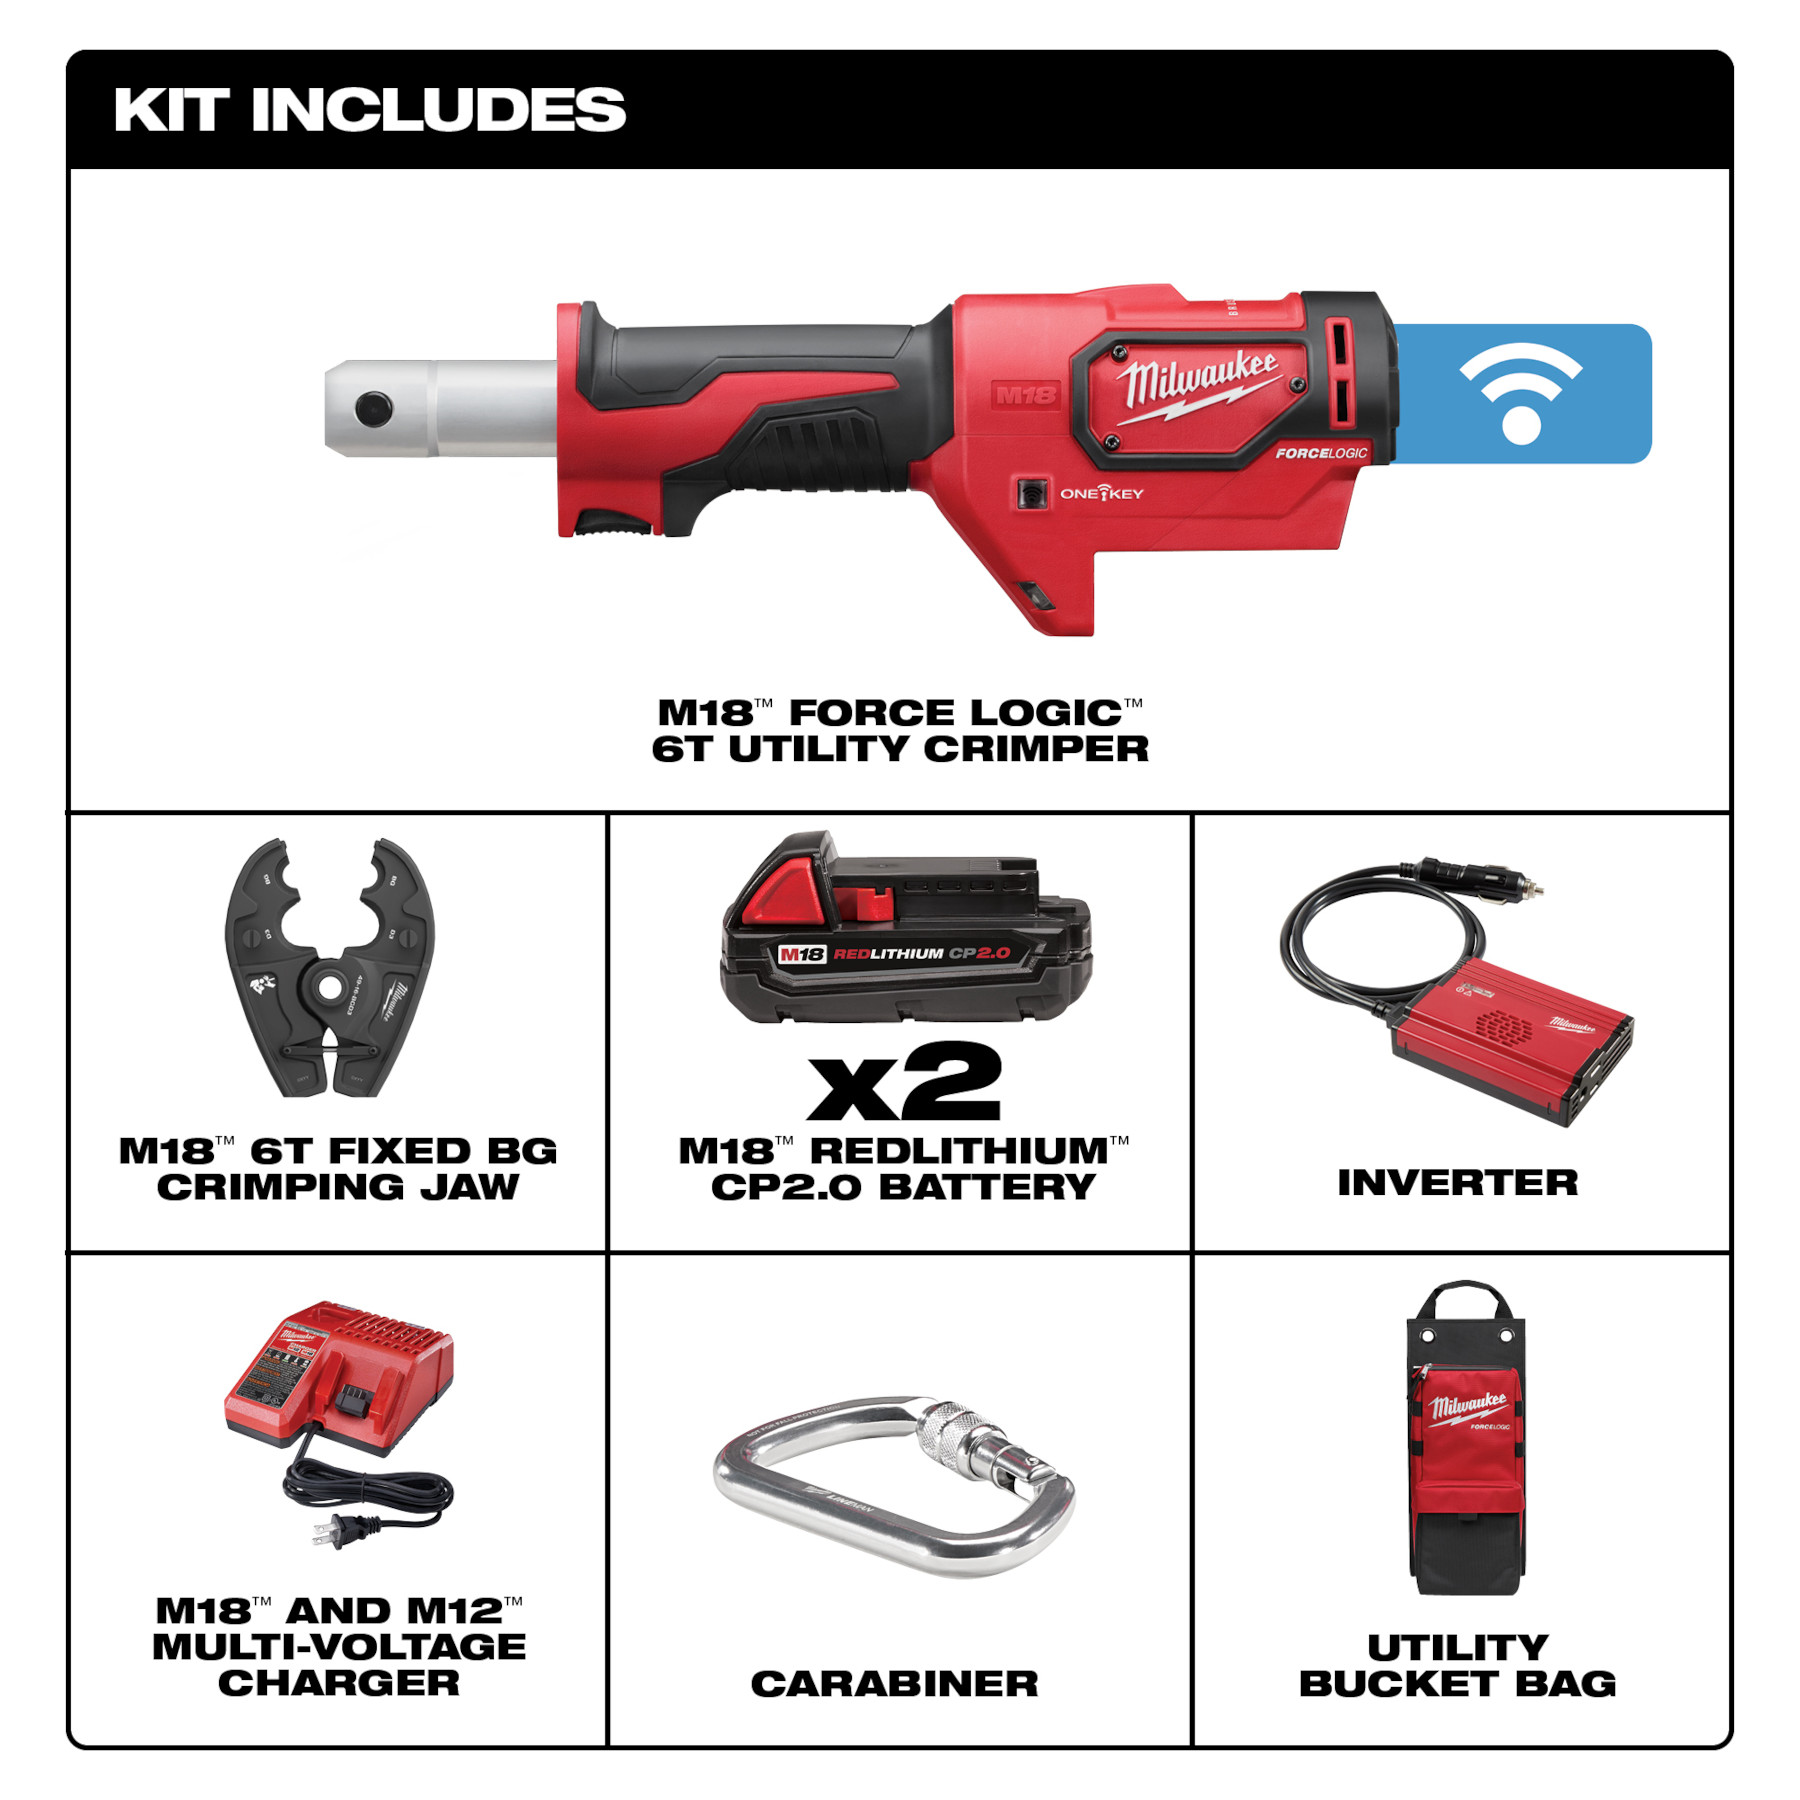 Milwaukee M18 FORCE LOGIC 6T Utility Crimper Kit with D3 Grooves and Fixed BG Die Kit from Columbia Safety